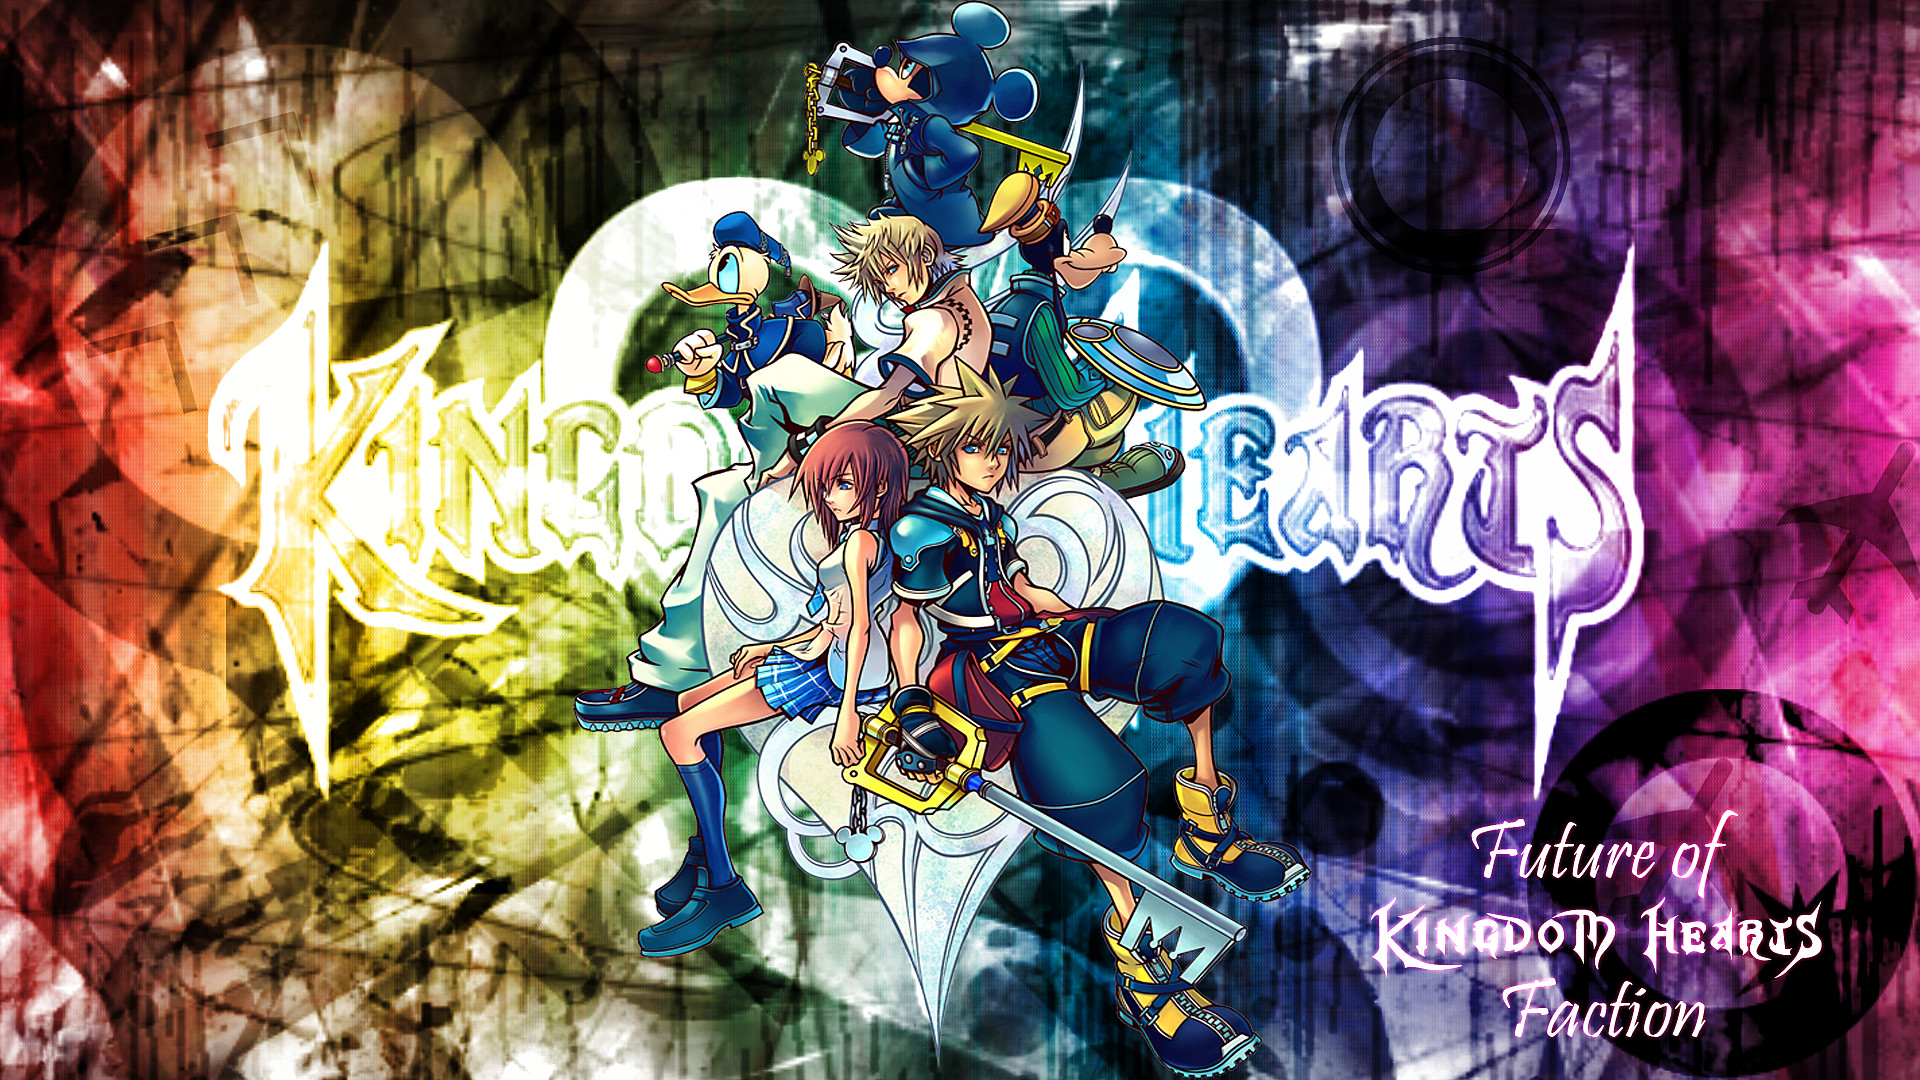 1920x1080 85 Kingdom Hearts HD Wallpapers | Backgrounds - Wallpaper Abyss ...